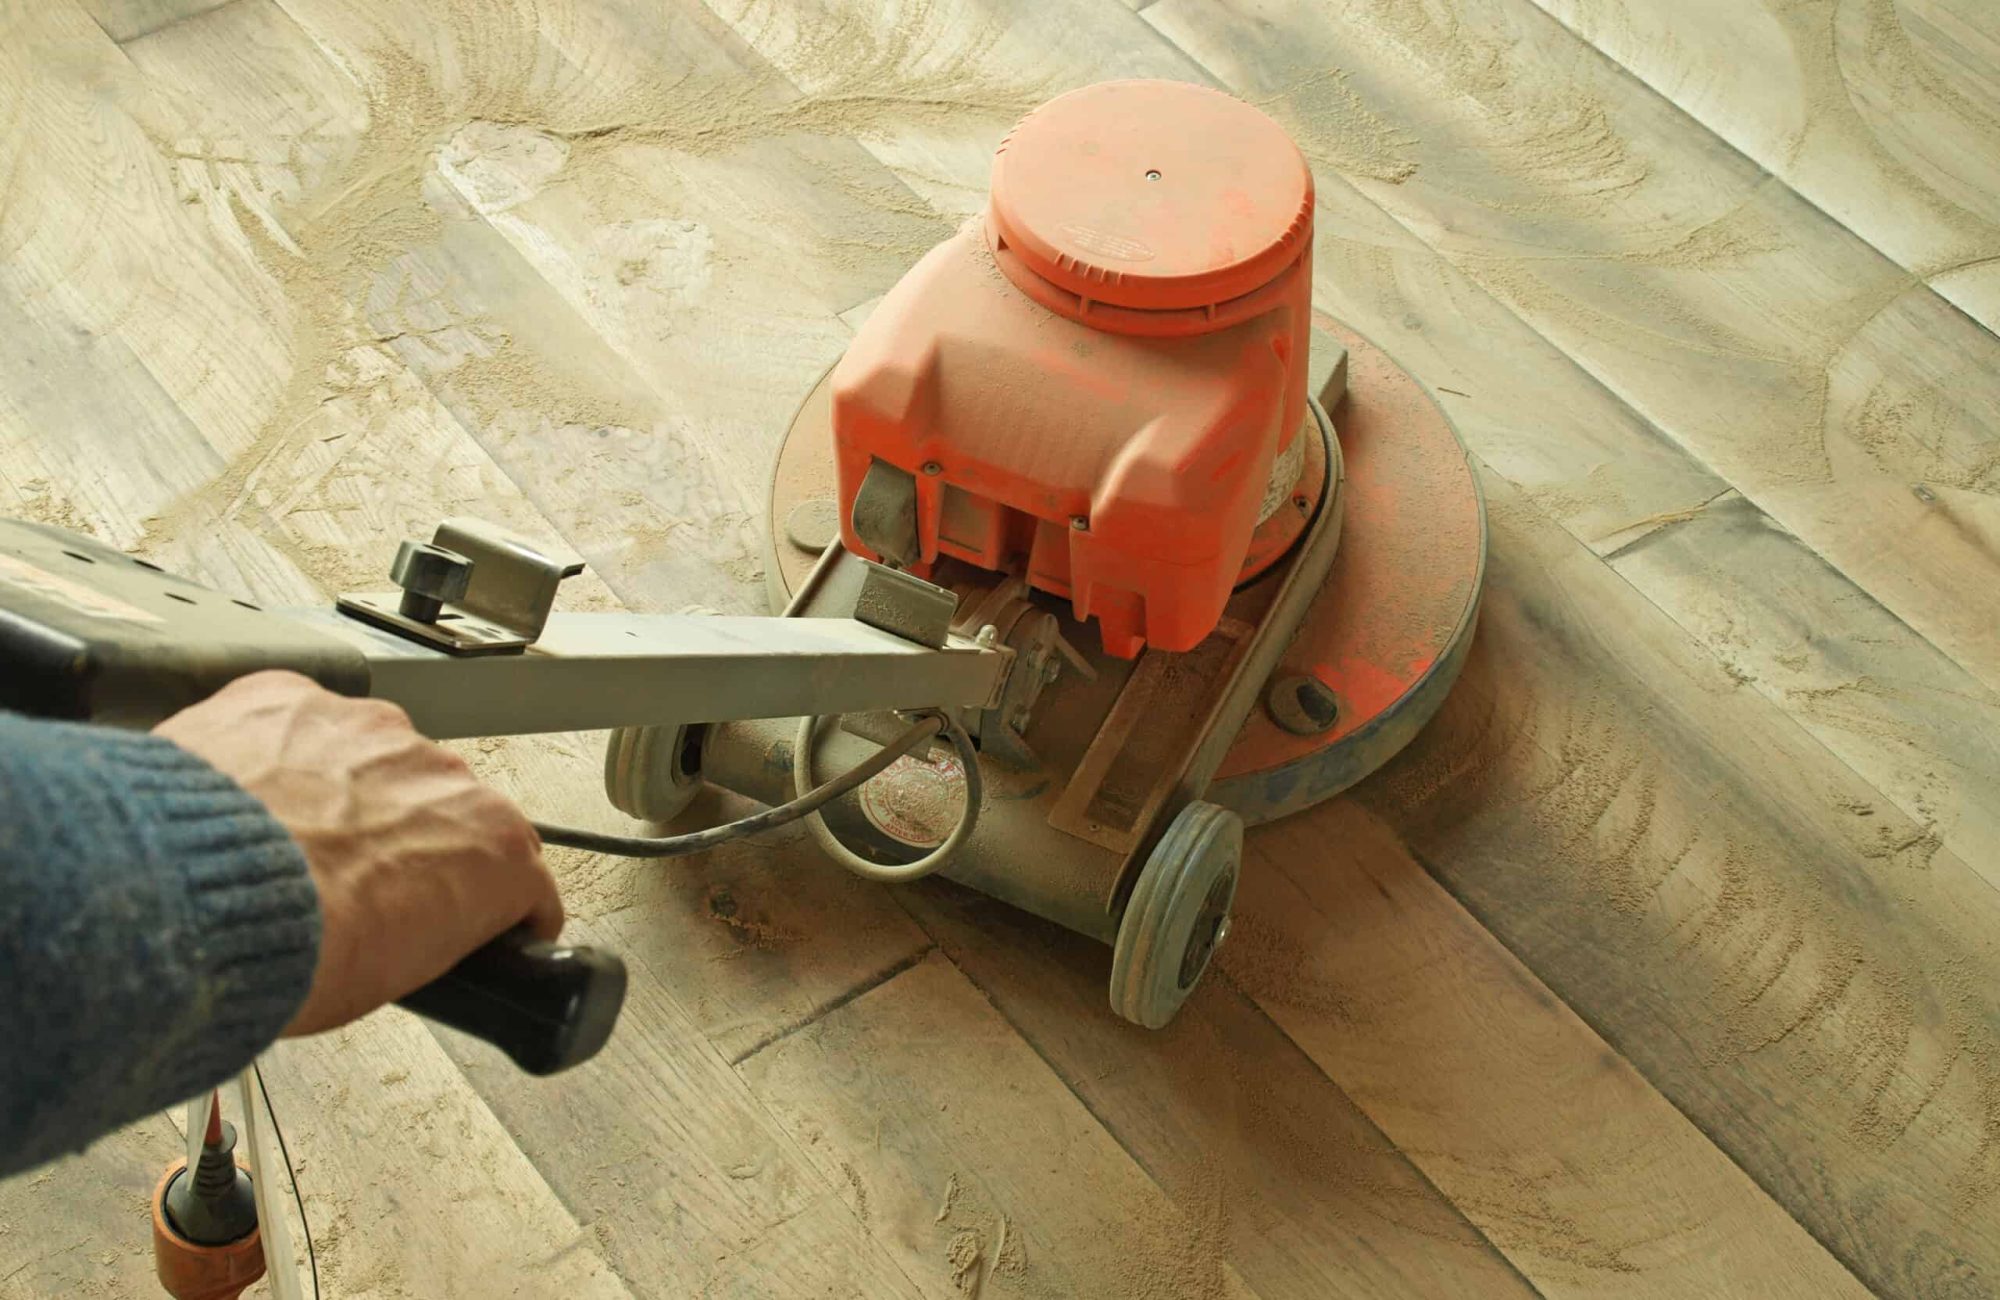 How Are Hardwood Floors Refinished? The Experts at Denver Dustless Weigh In